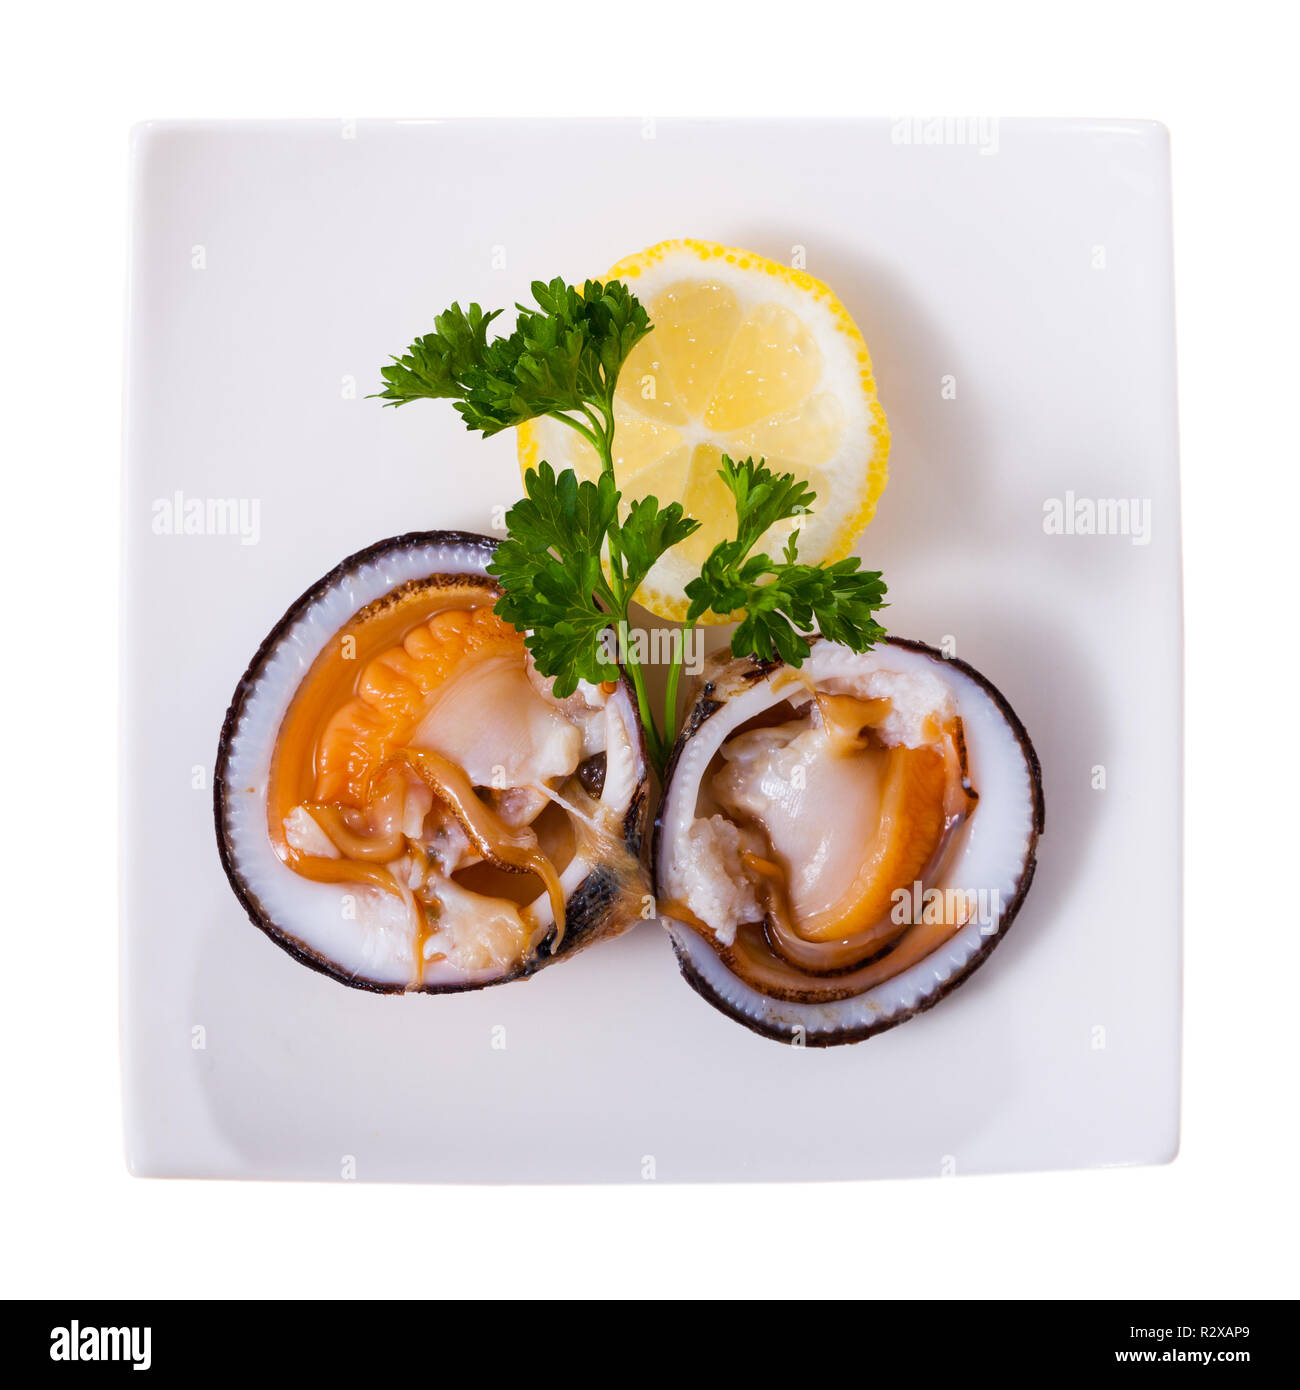 Top view of raw dog cockles served on white plate with lemon and greens. Isolated over white background Stock Photo